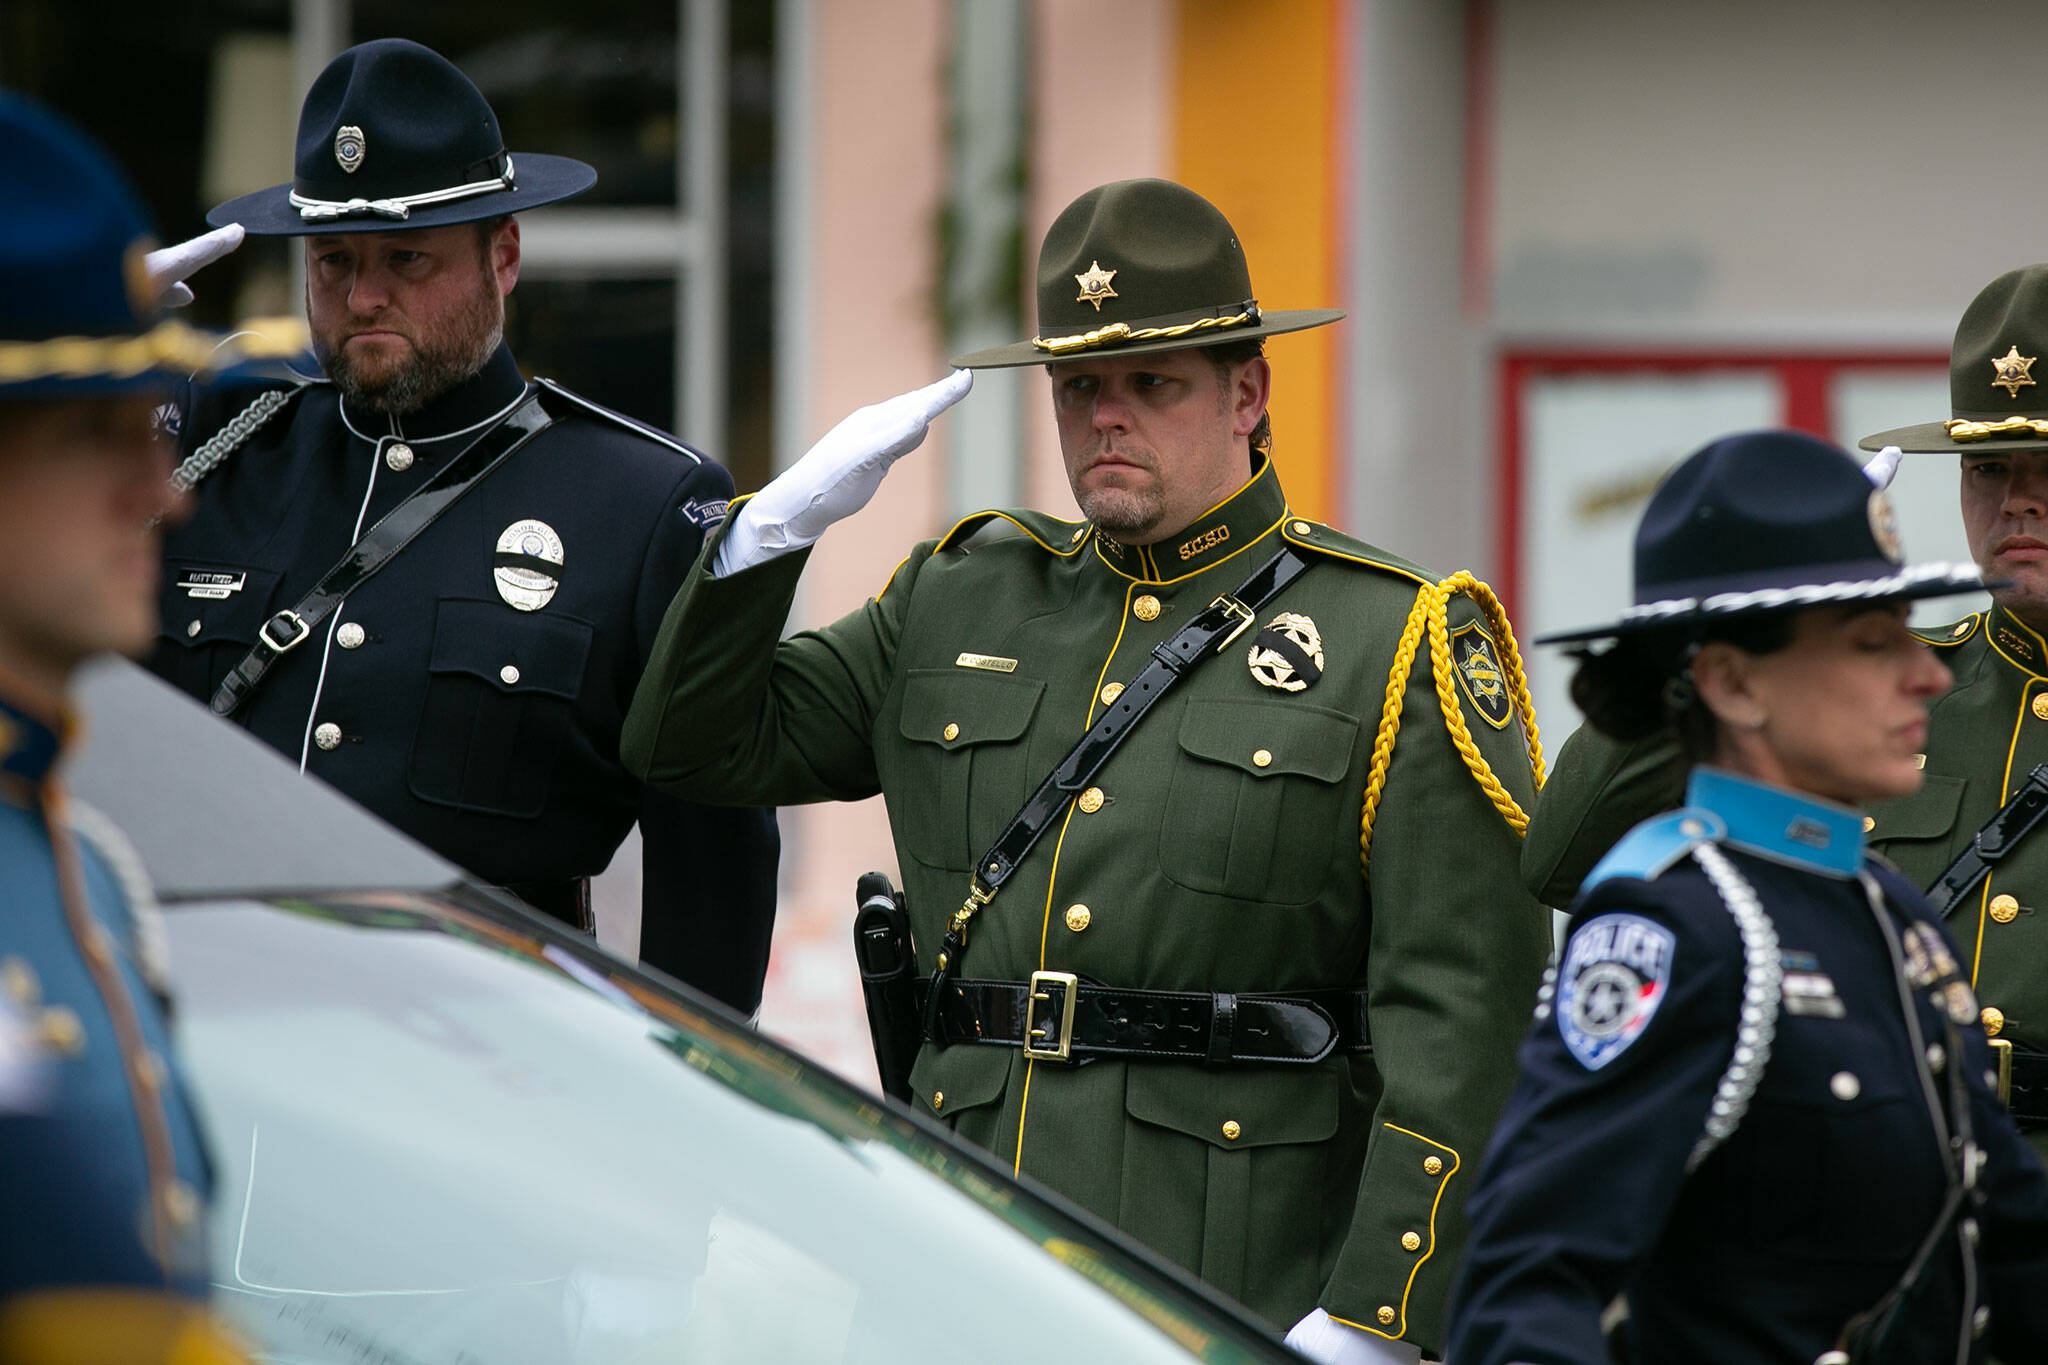 Law enforcement salute Washington State Trooper Chris Gadd during a processional on Tuesday, March 12, 2024, at Angel of the Winds Arena in Everett, Washington. (Ryan Berry / The Herald)